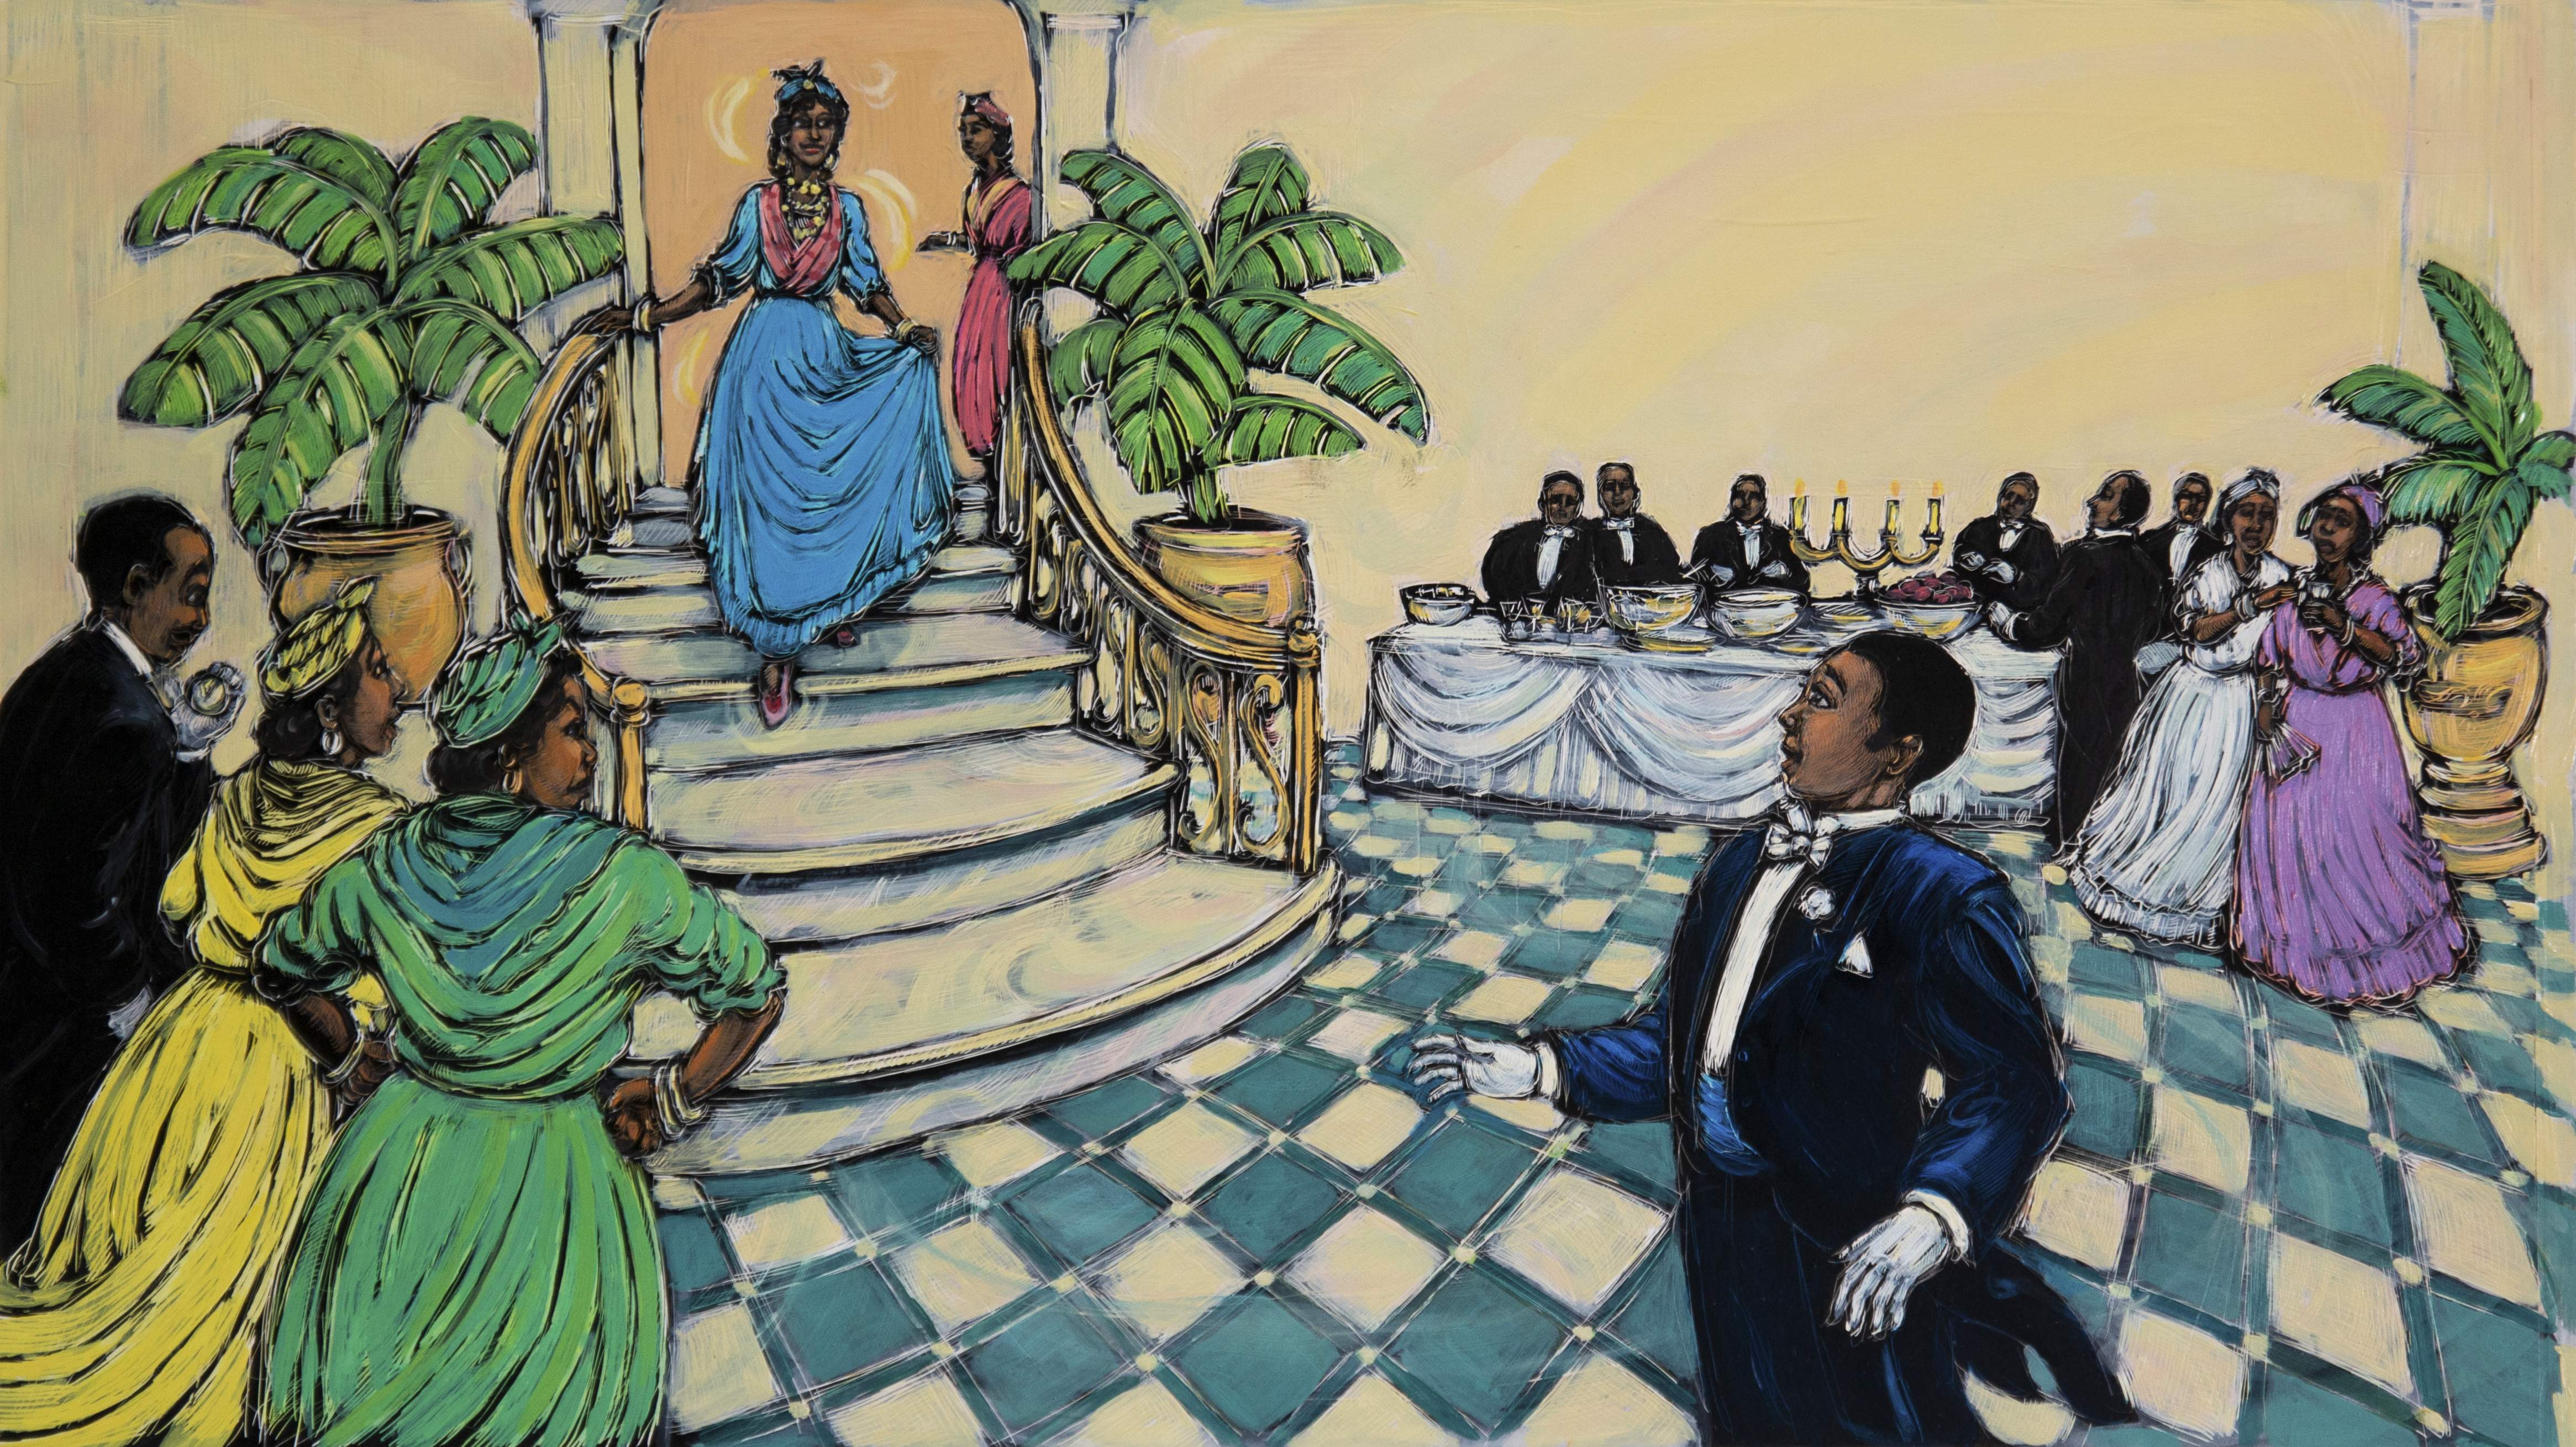 Brian Pinkney (b. 1961), What a grand entrance Cendrillon made!, 1998, oil on scratchboard. Collection of the artist. Illustration for Cendrillon, A Caribbean Cinderella by Robert D. San Souci (Simon and Schuster Books for Young Readers, 1998)